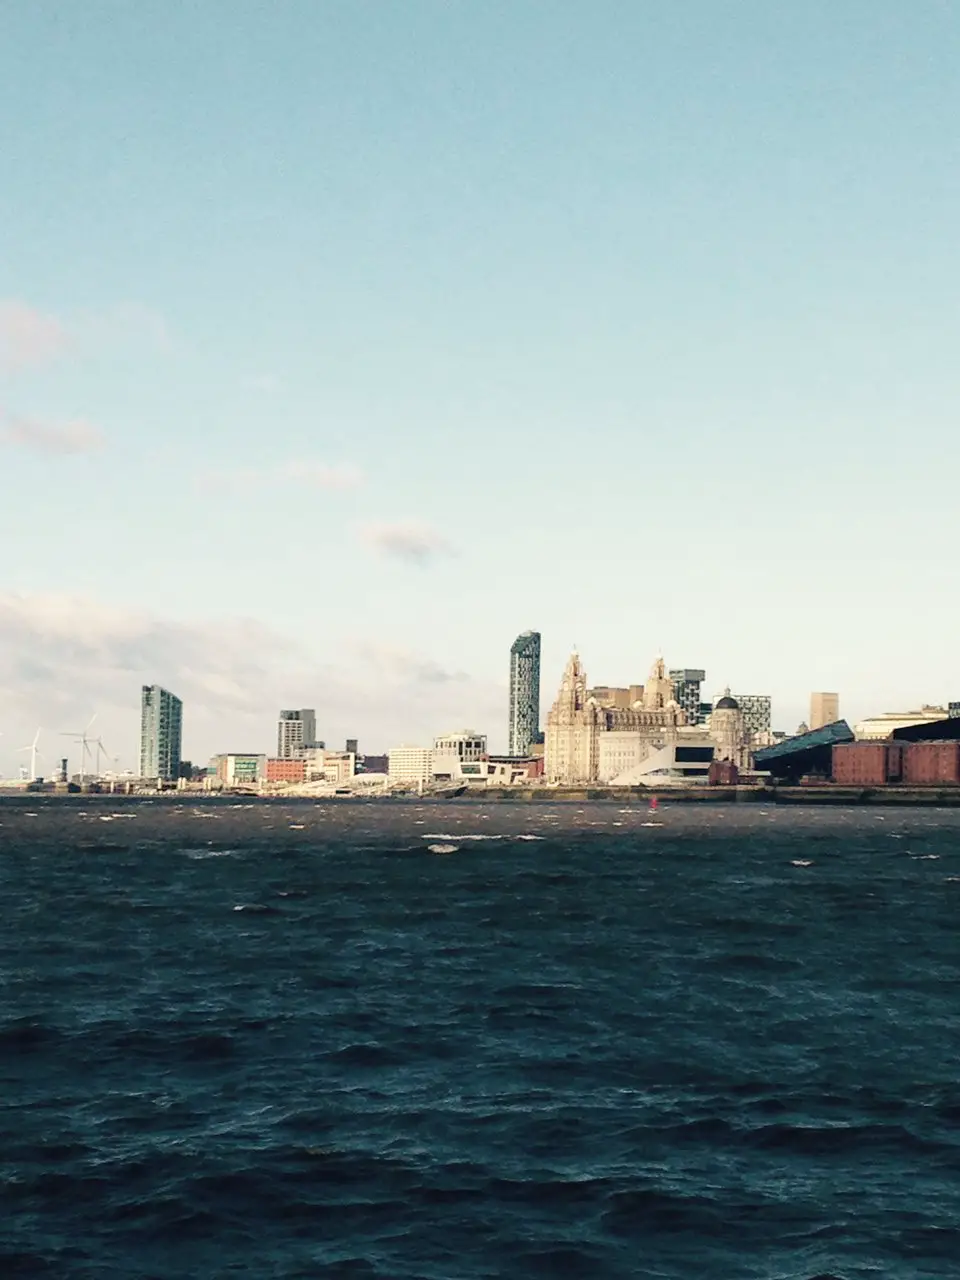 City skyline of Liverpool with the River Mersey in the foreground